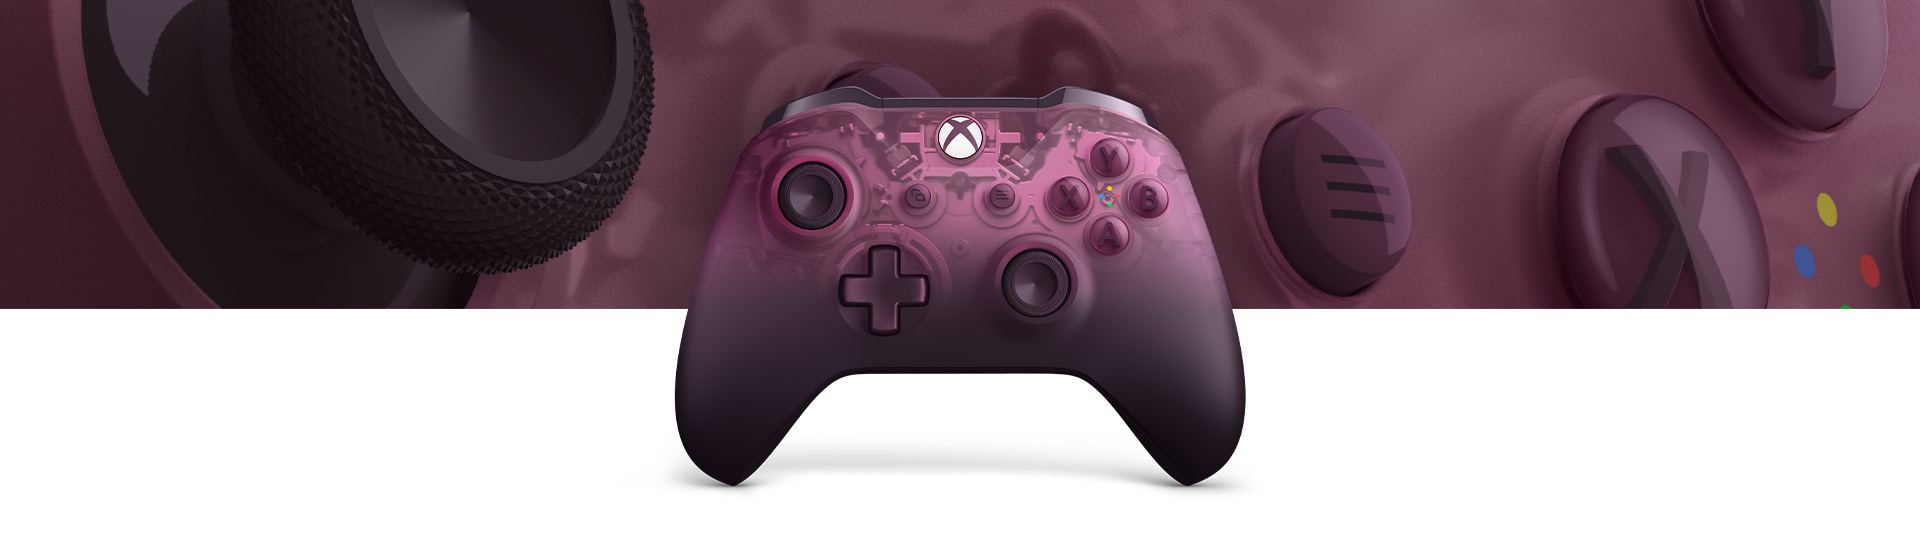 rose gold xbox one series x